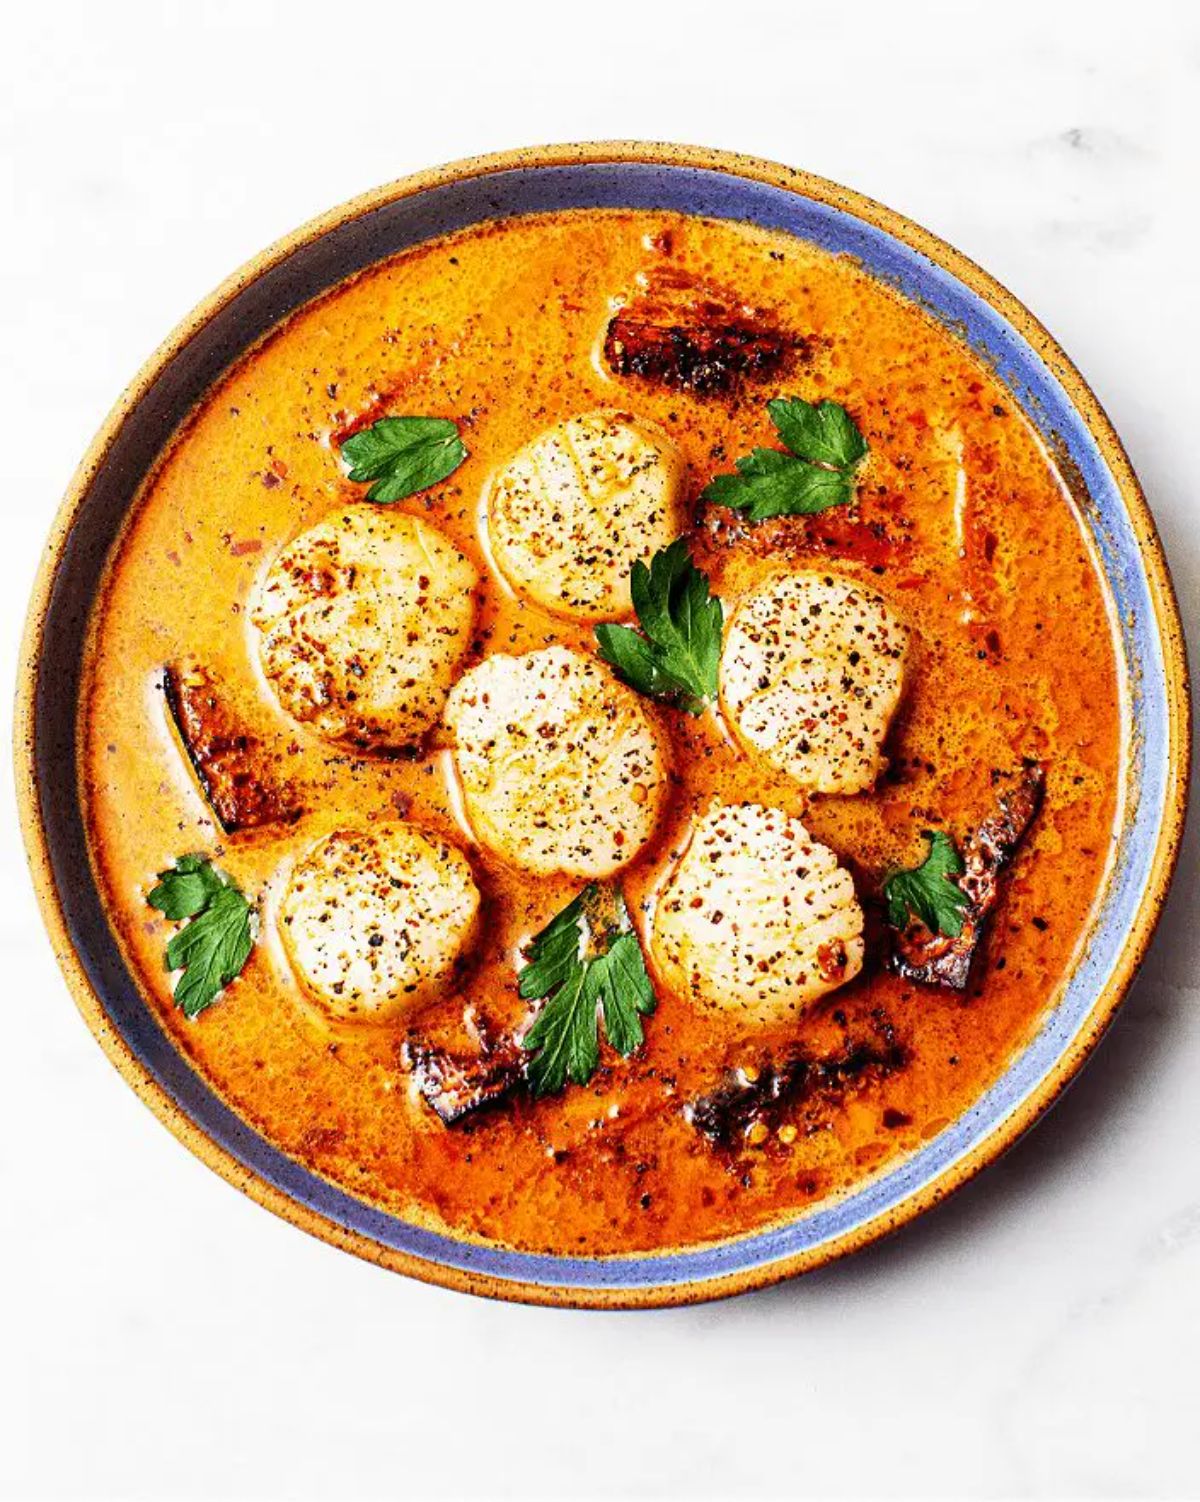 Mouth-watering Spicy Coconut Curry Scallops on a plate.